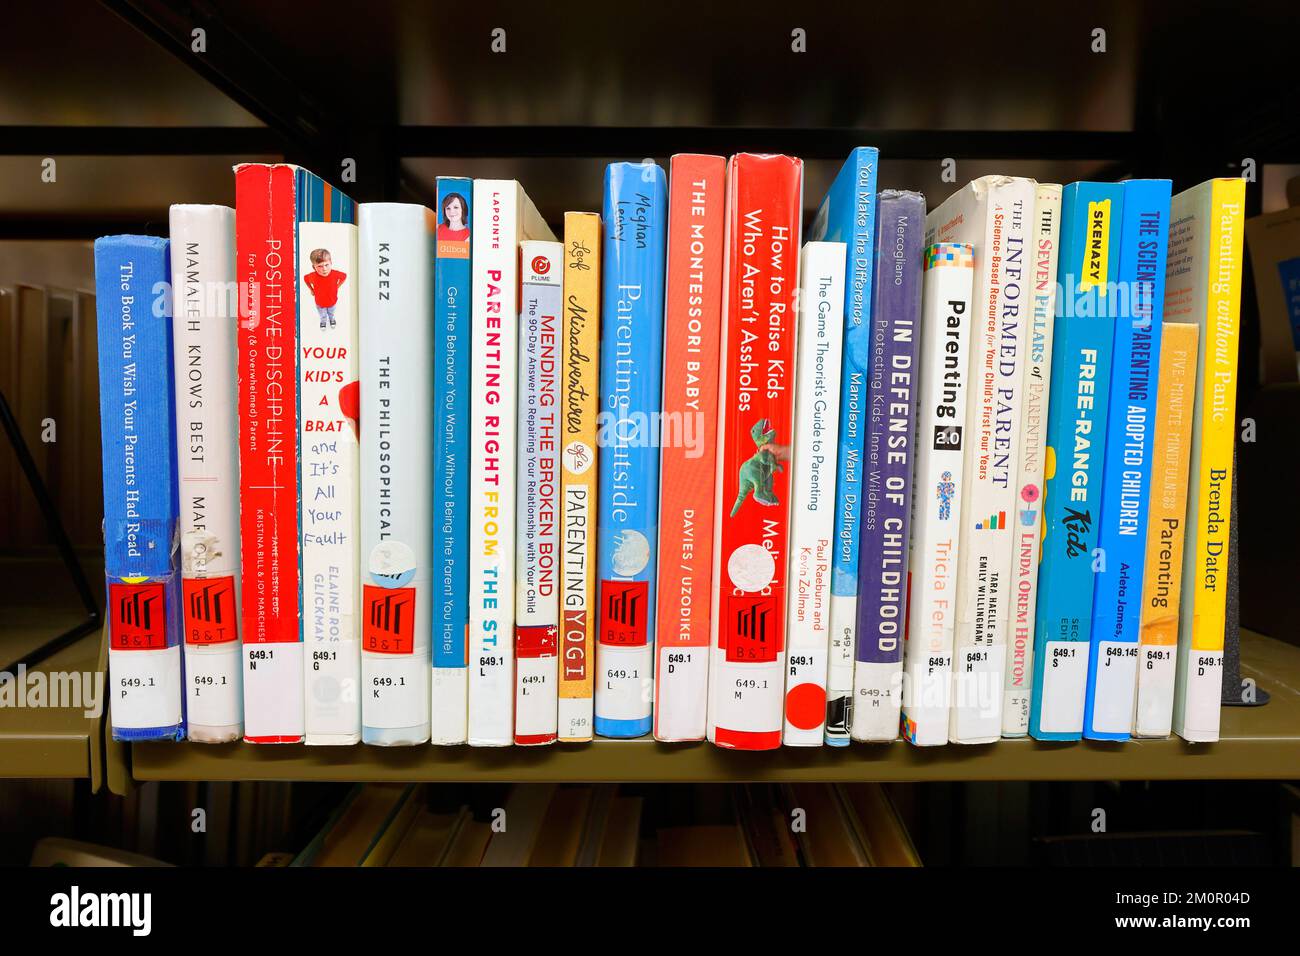 Do it yourself, self help, professional advice books on parenting and child raising on a library shelf. Stock Photo